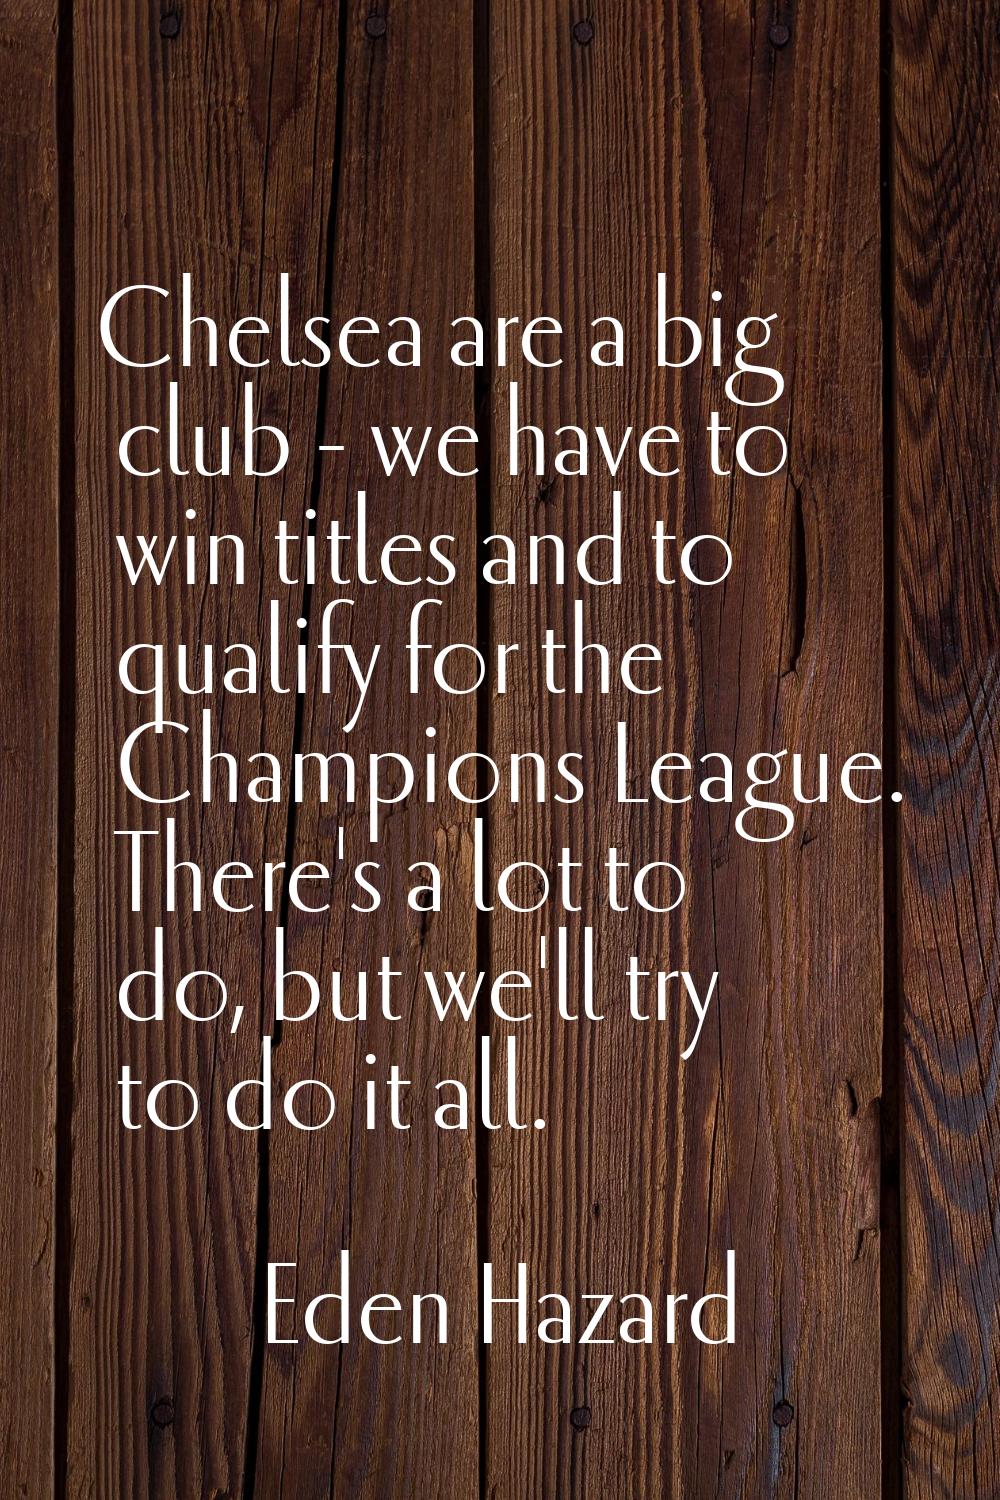 Chelsea are a big club - we have to win titles and to qualify for the Champions League. There's a l